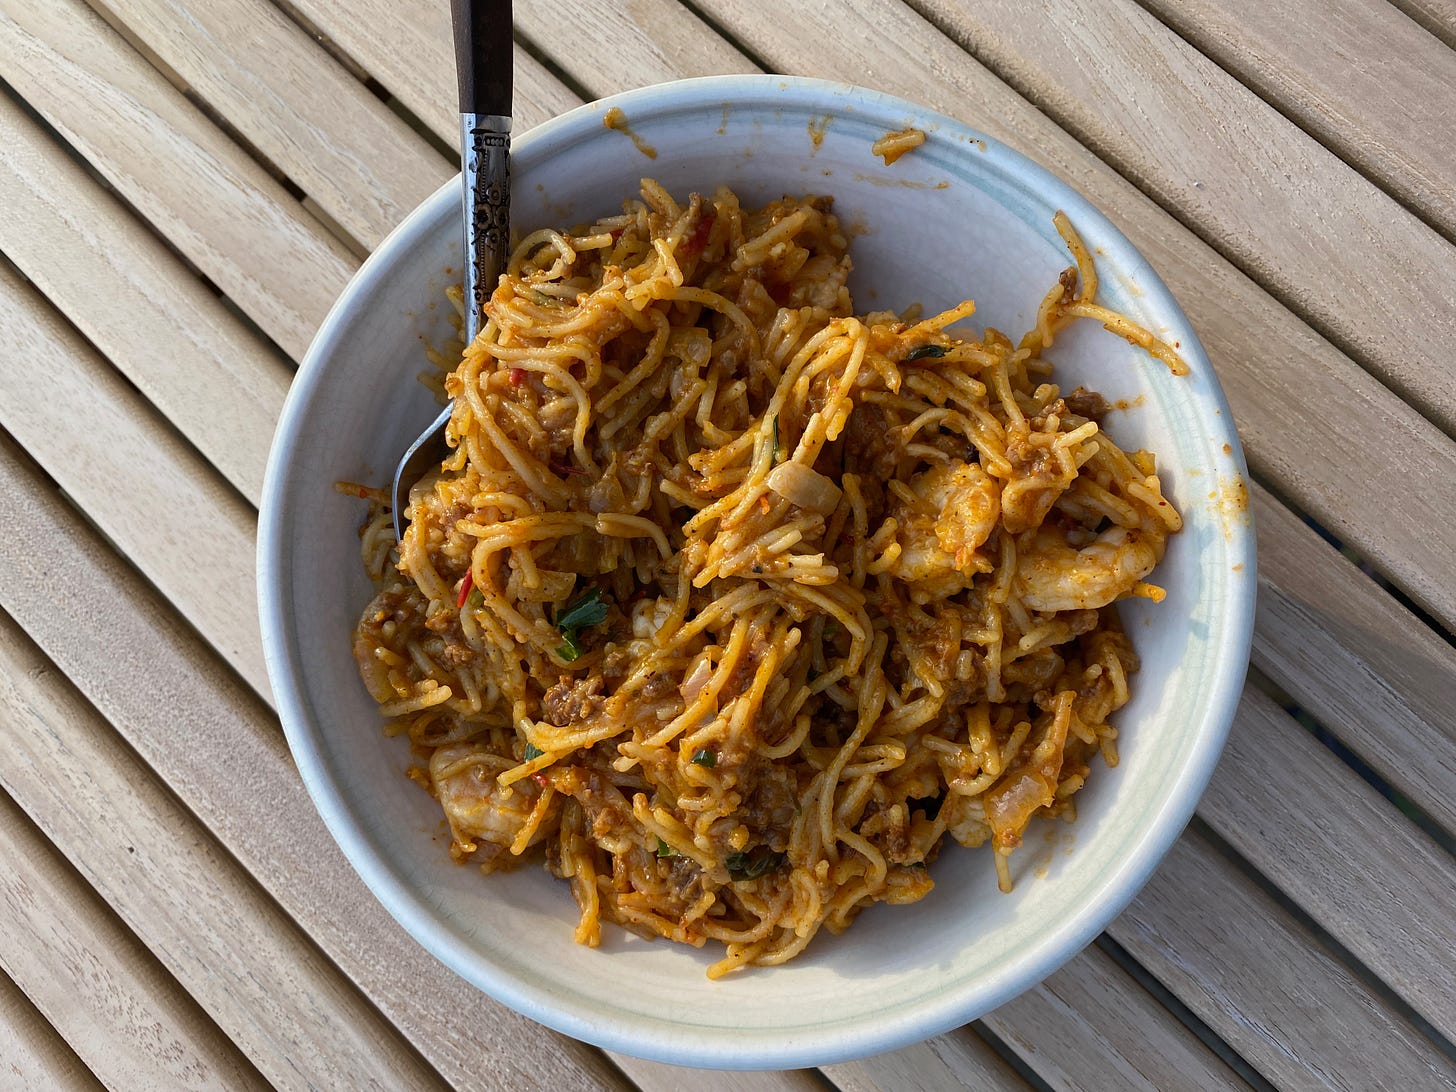 A ceramic bowl of angel hair pasta in a spicy red sauce sits on a wooden outdoor table.